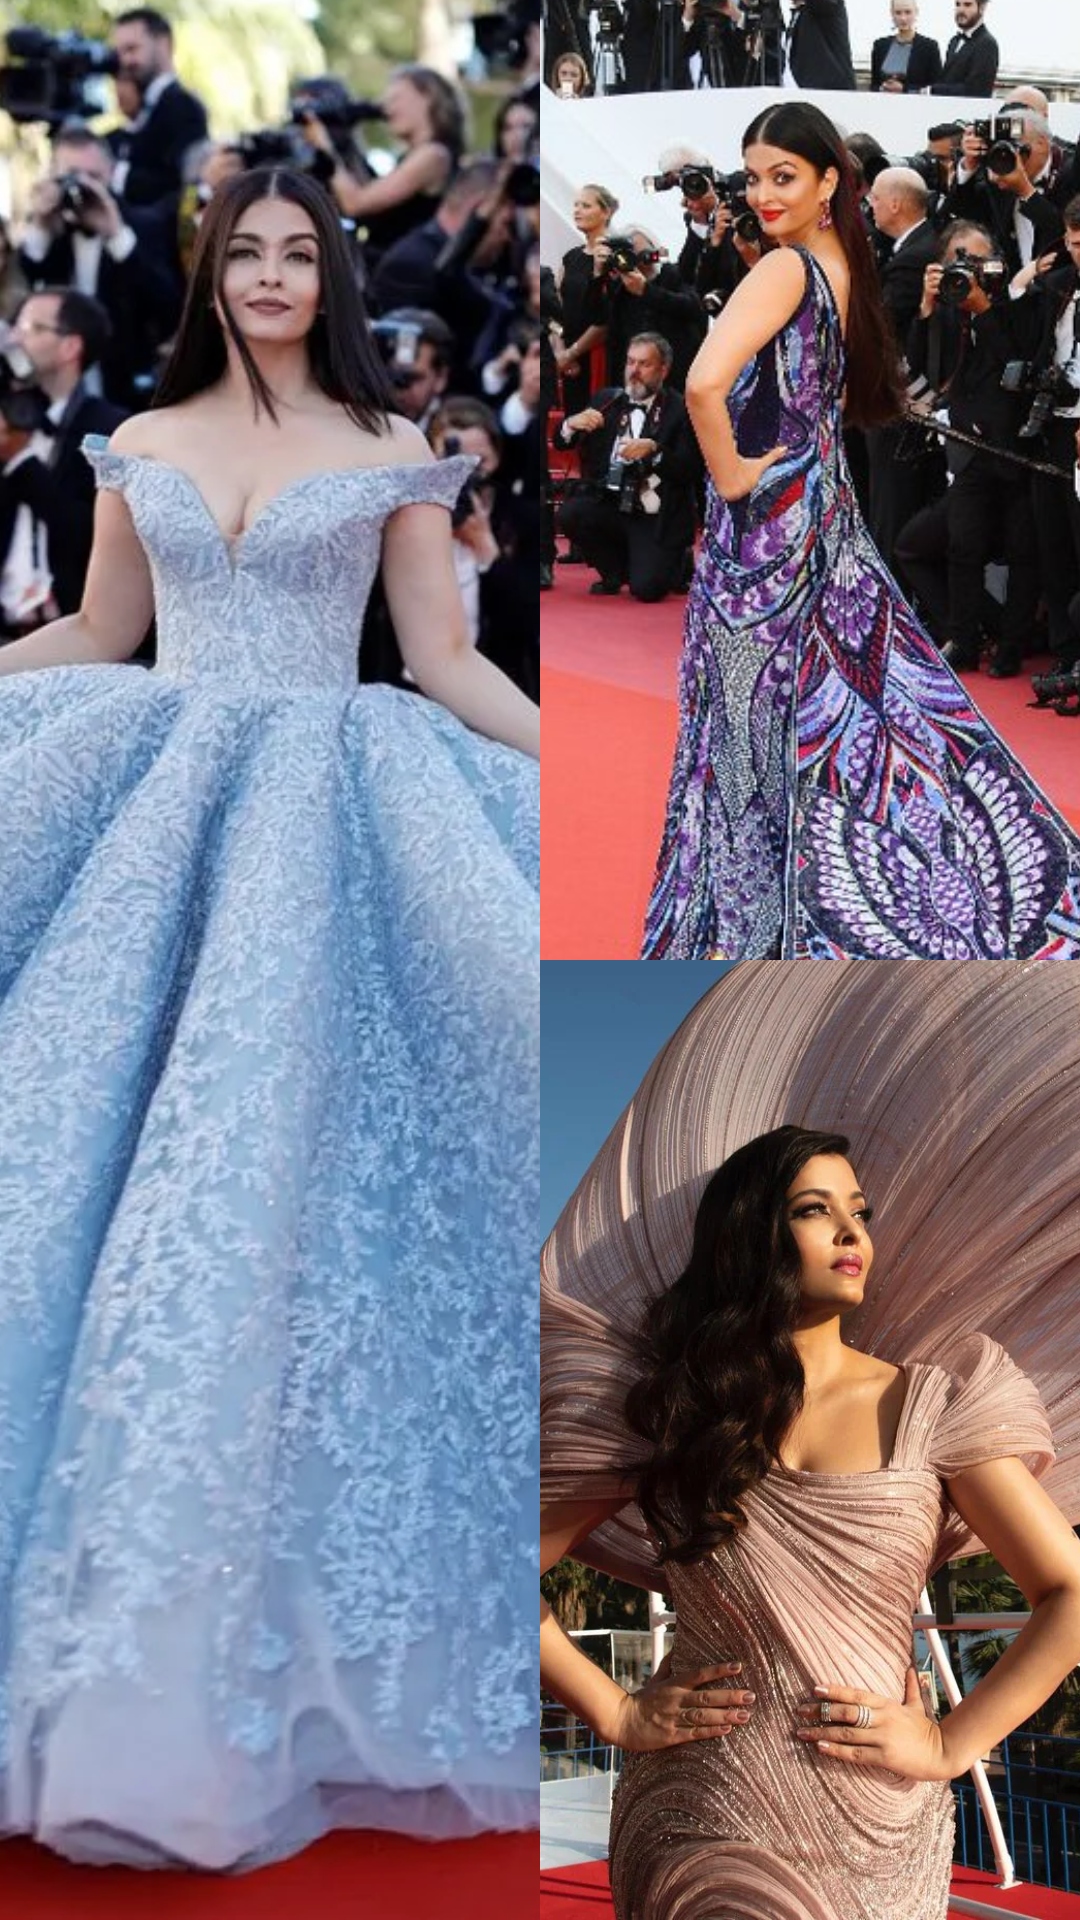 When Aishwarya Rai Bachchan Shut Down The Red Carpet At Cannes With Her  Iconic Cinderella Appearance